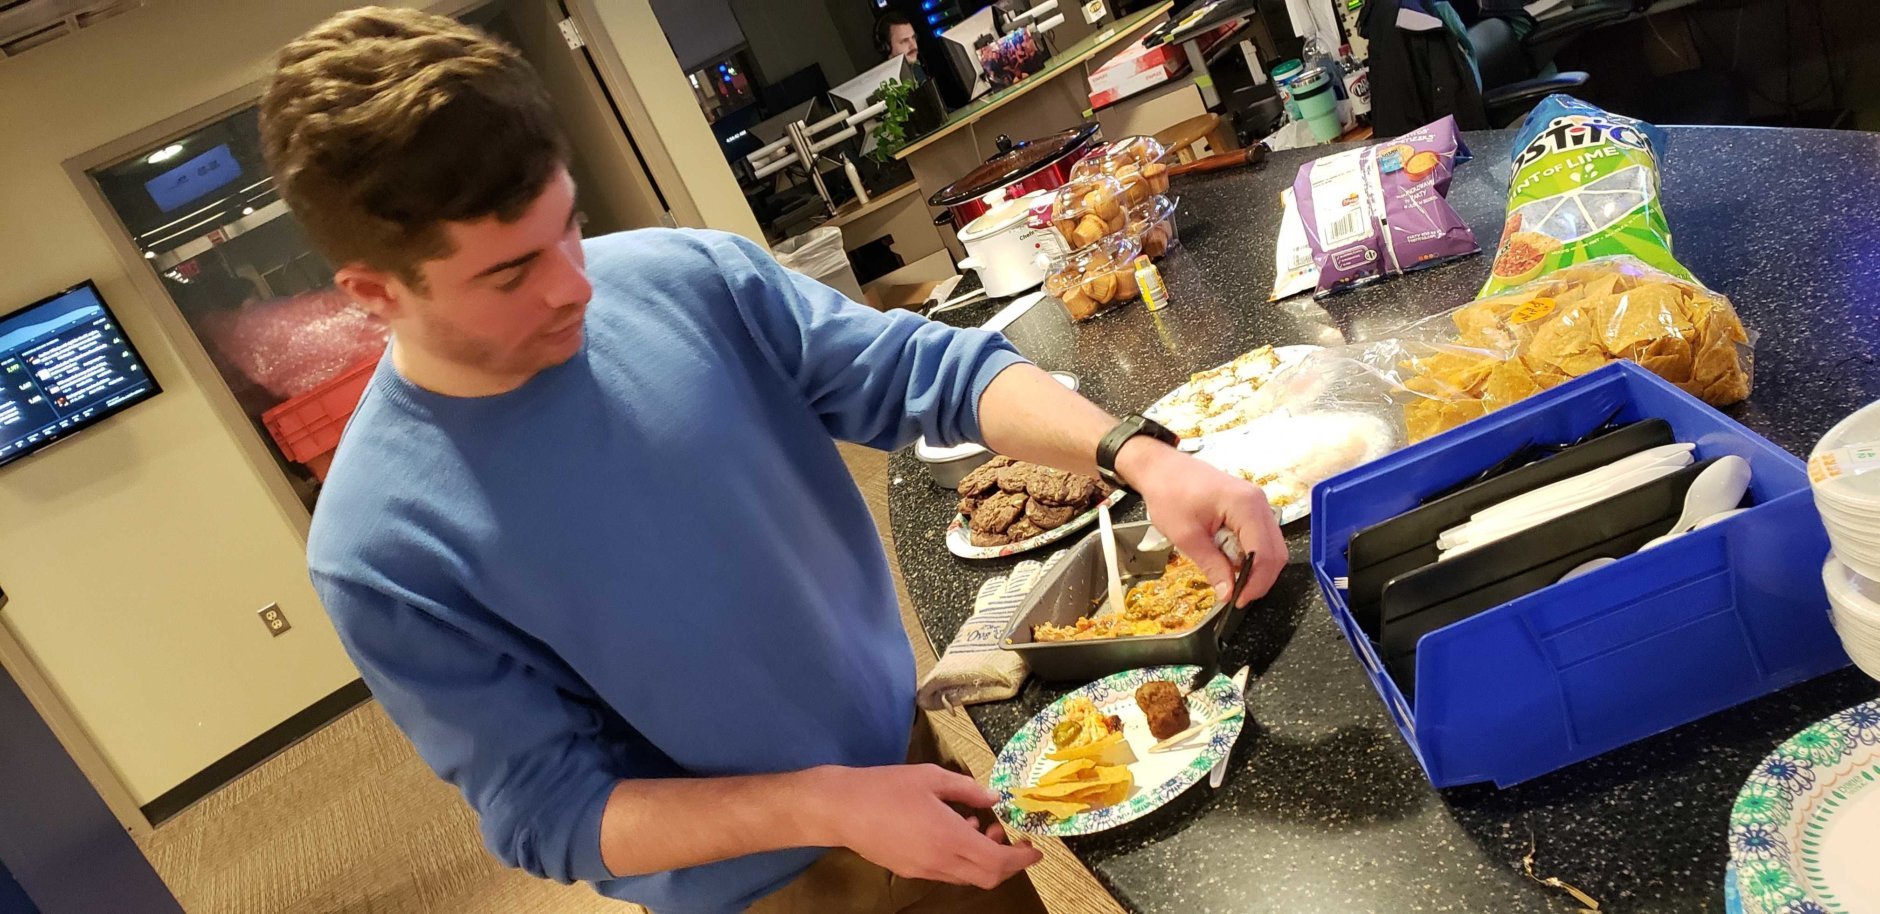 Assistant editor Teddy Gelman preparing his plate to get the proper energy to take on his shift. (WTOP/Brandon Millman) 